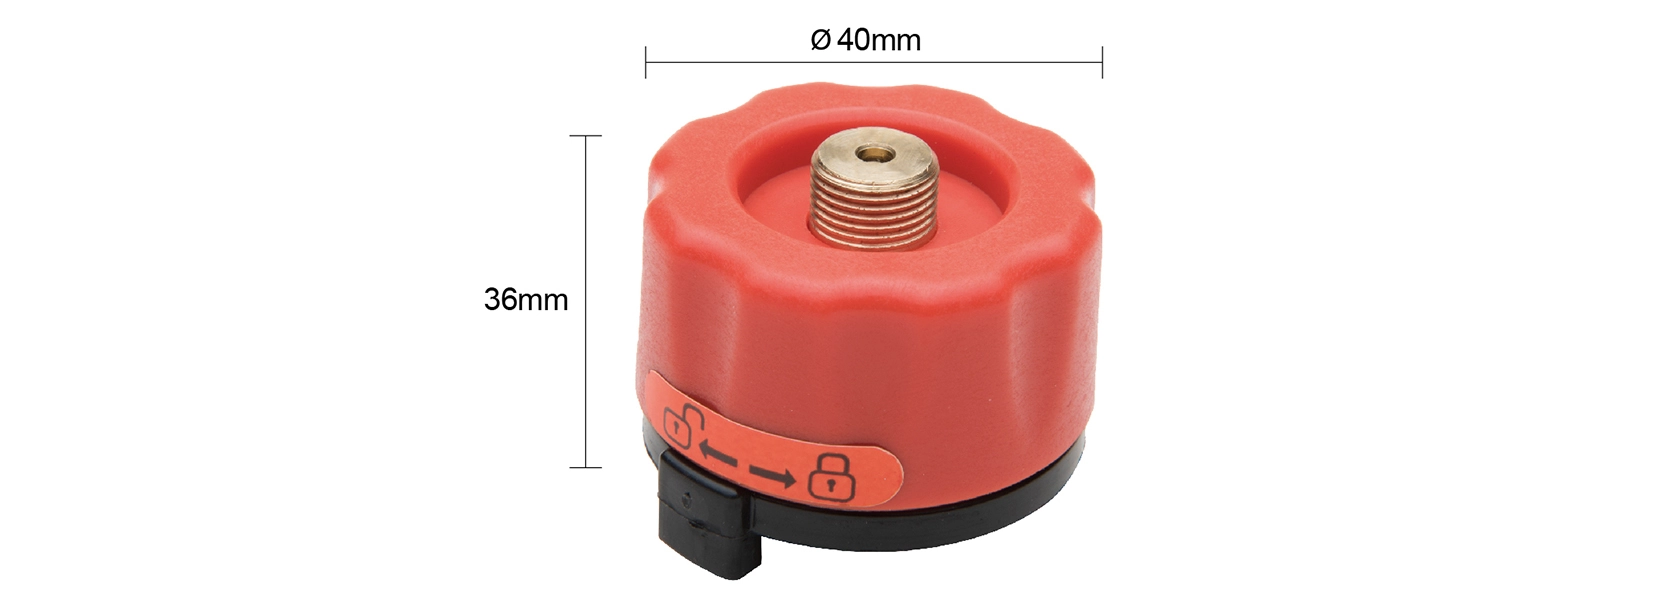 details of 220g Nozzle Gas Bottle Convertor Butane Stove Adapter